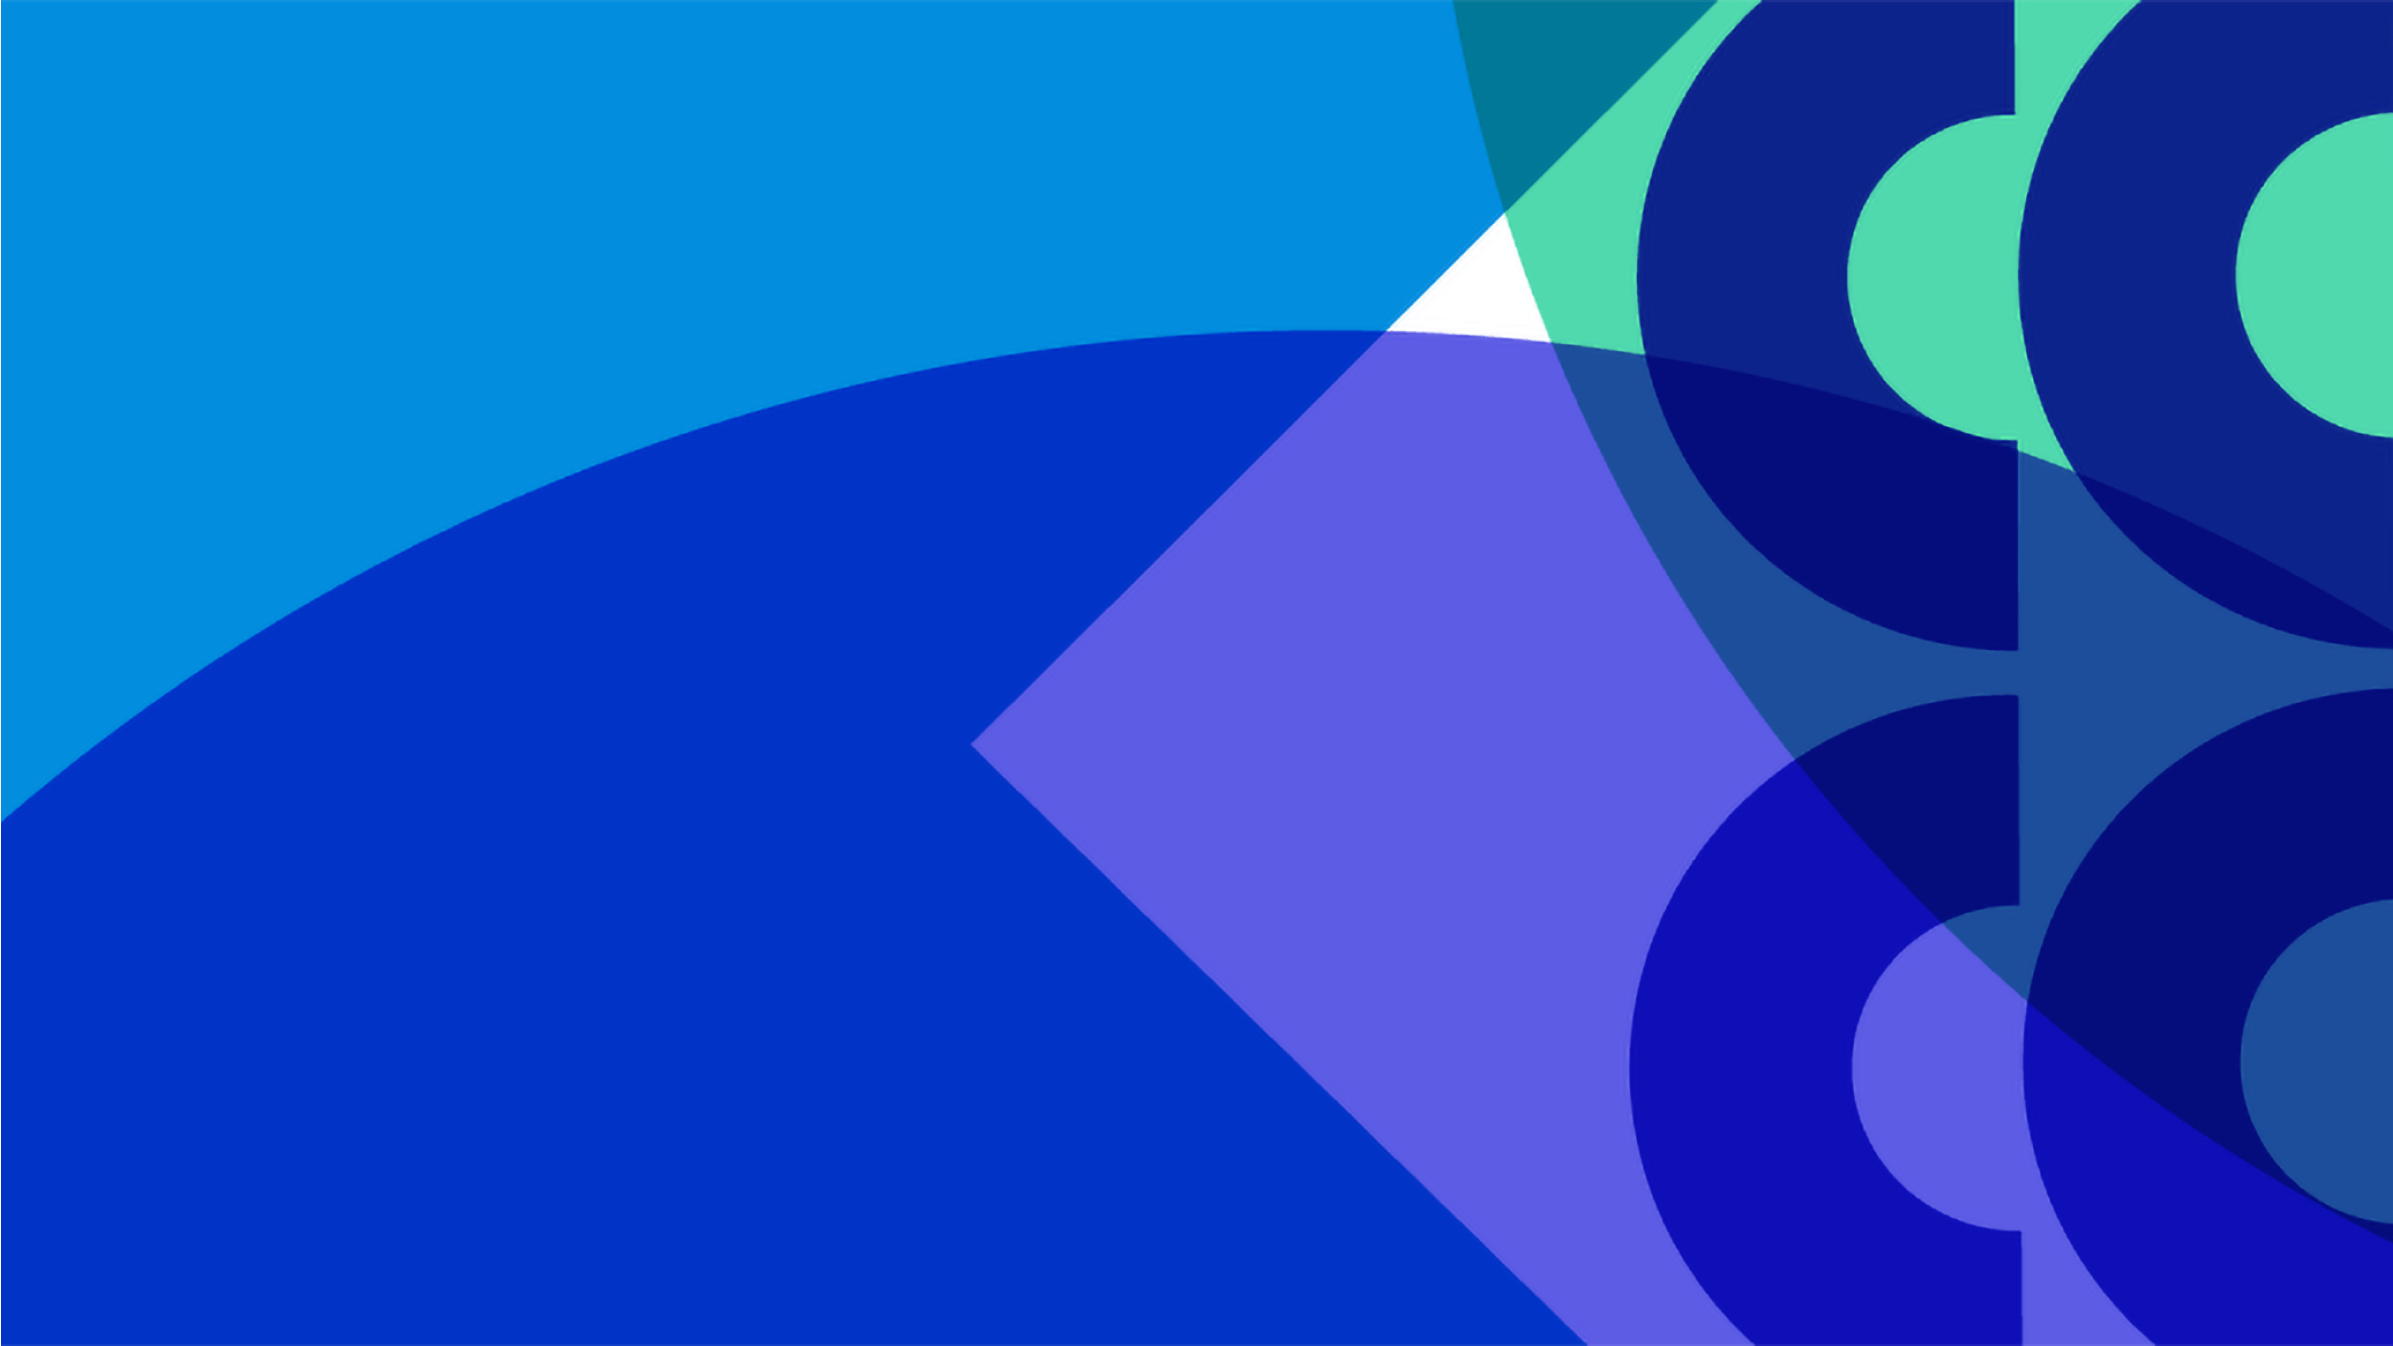 An abstract image in blues and purples featuring overlapping circles and noughts.